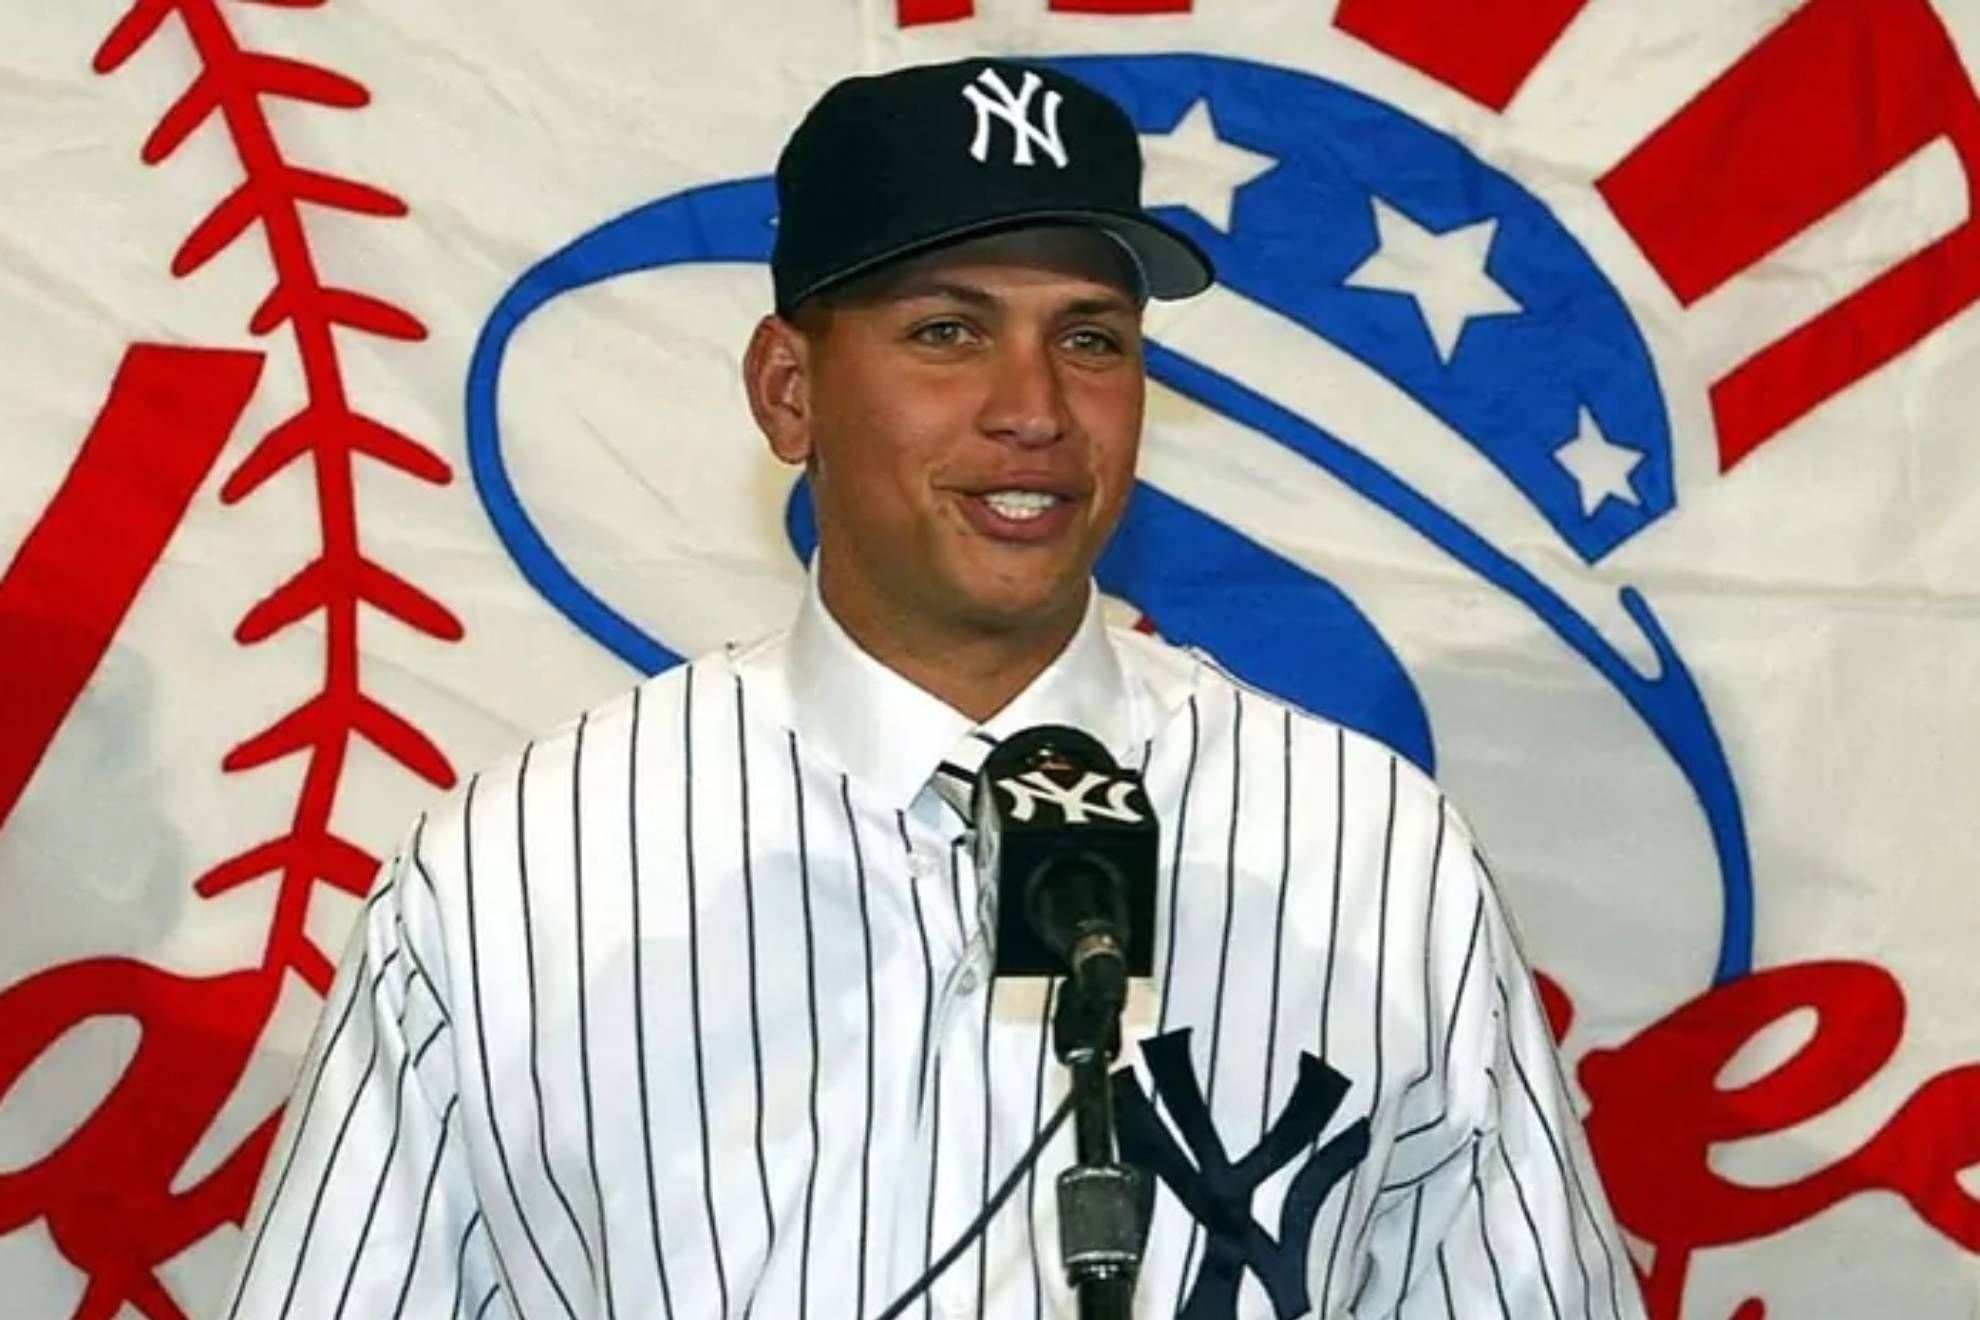 Alex Rodriguez and his controversial use of viagra "for fun" while playing for the Yankees